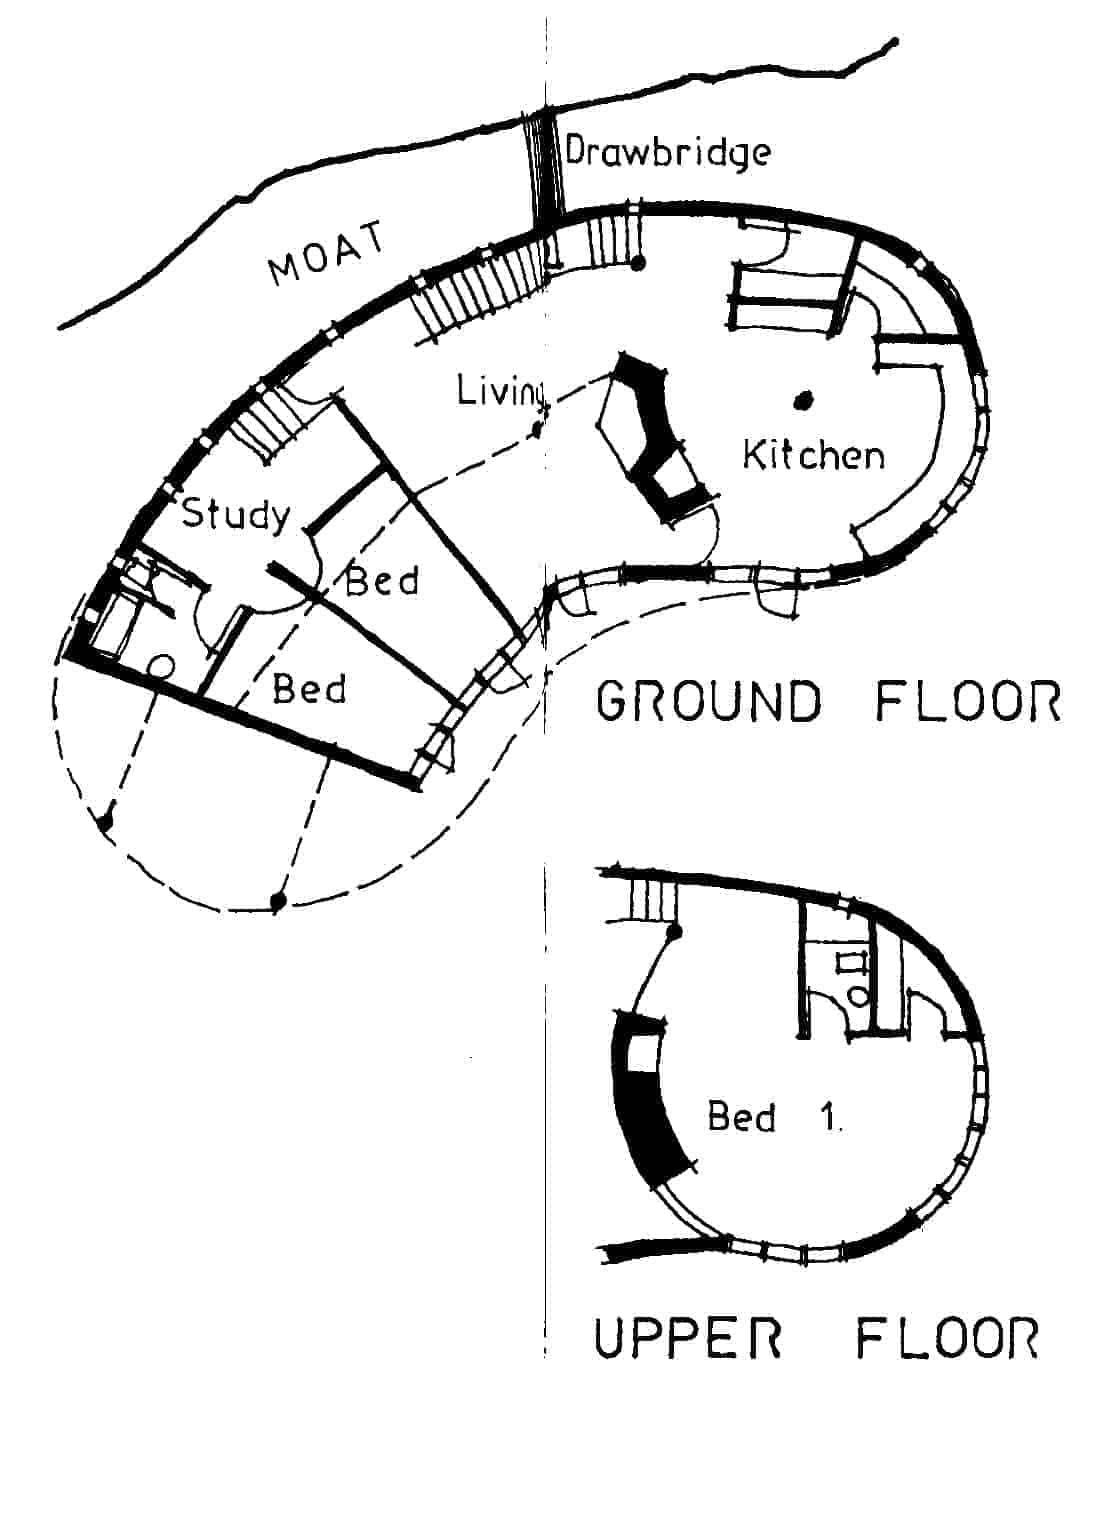 Plan of the Batty house